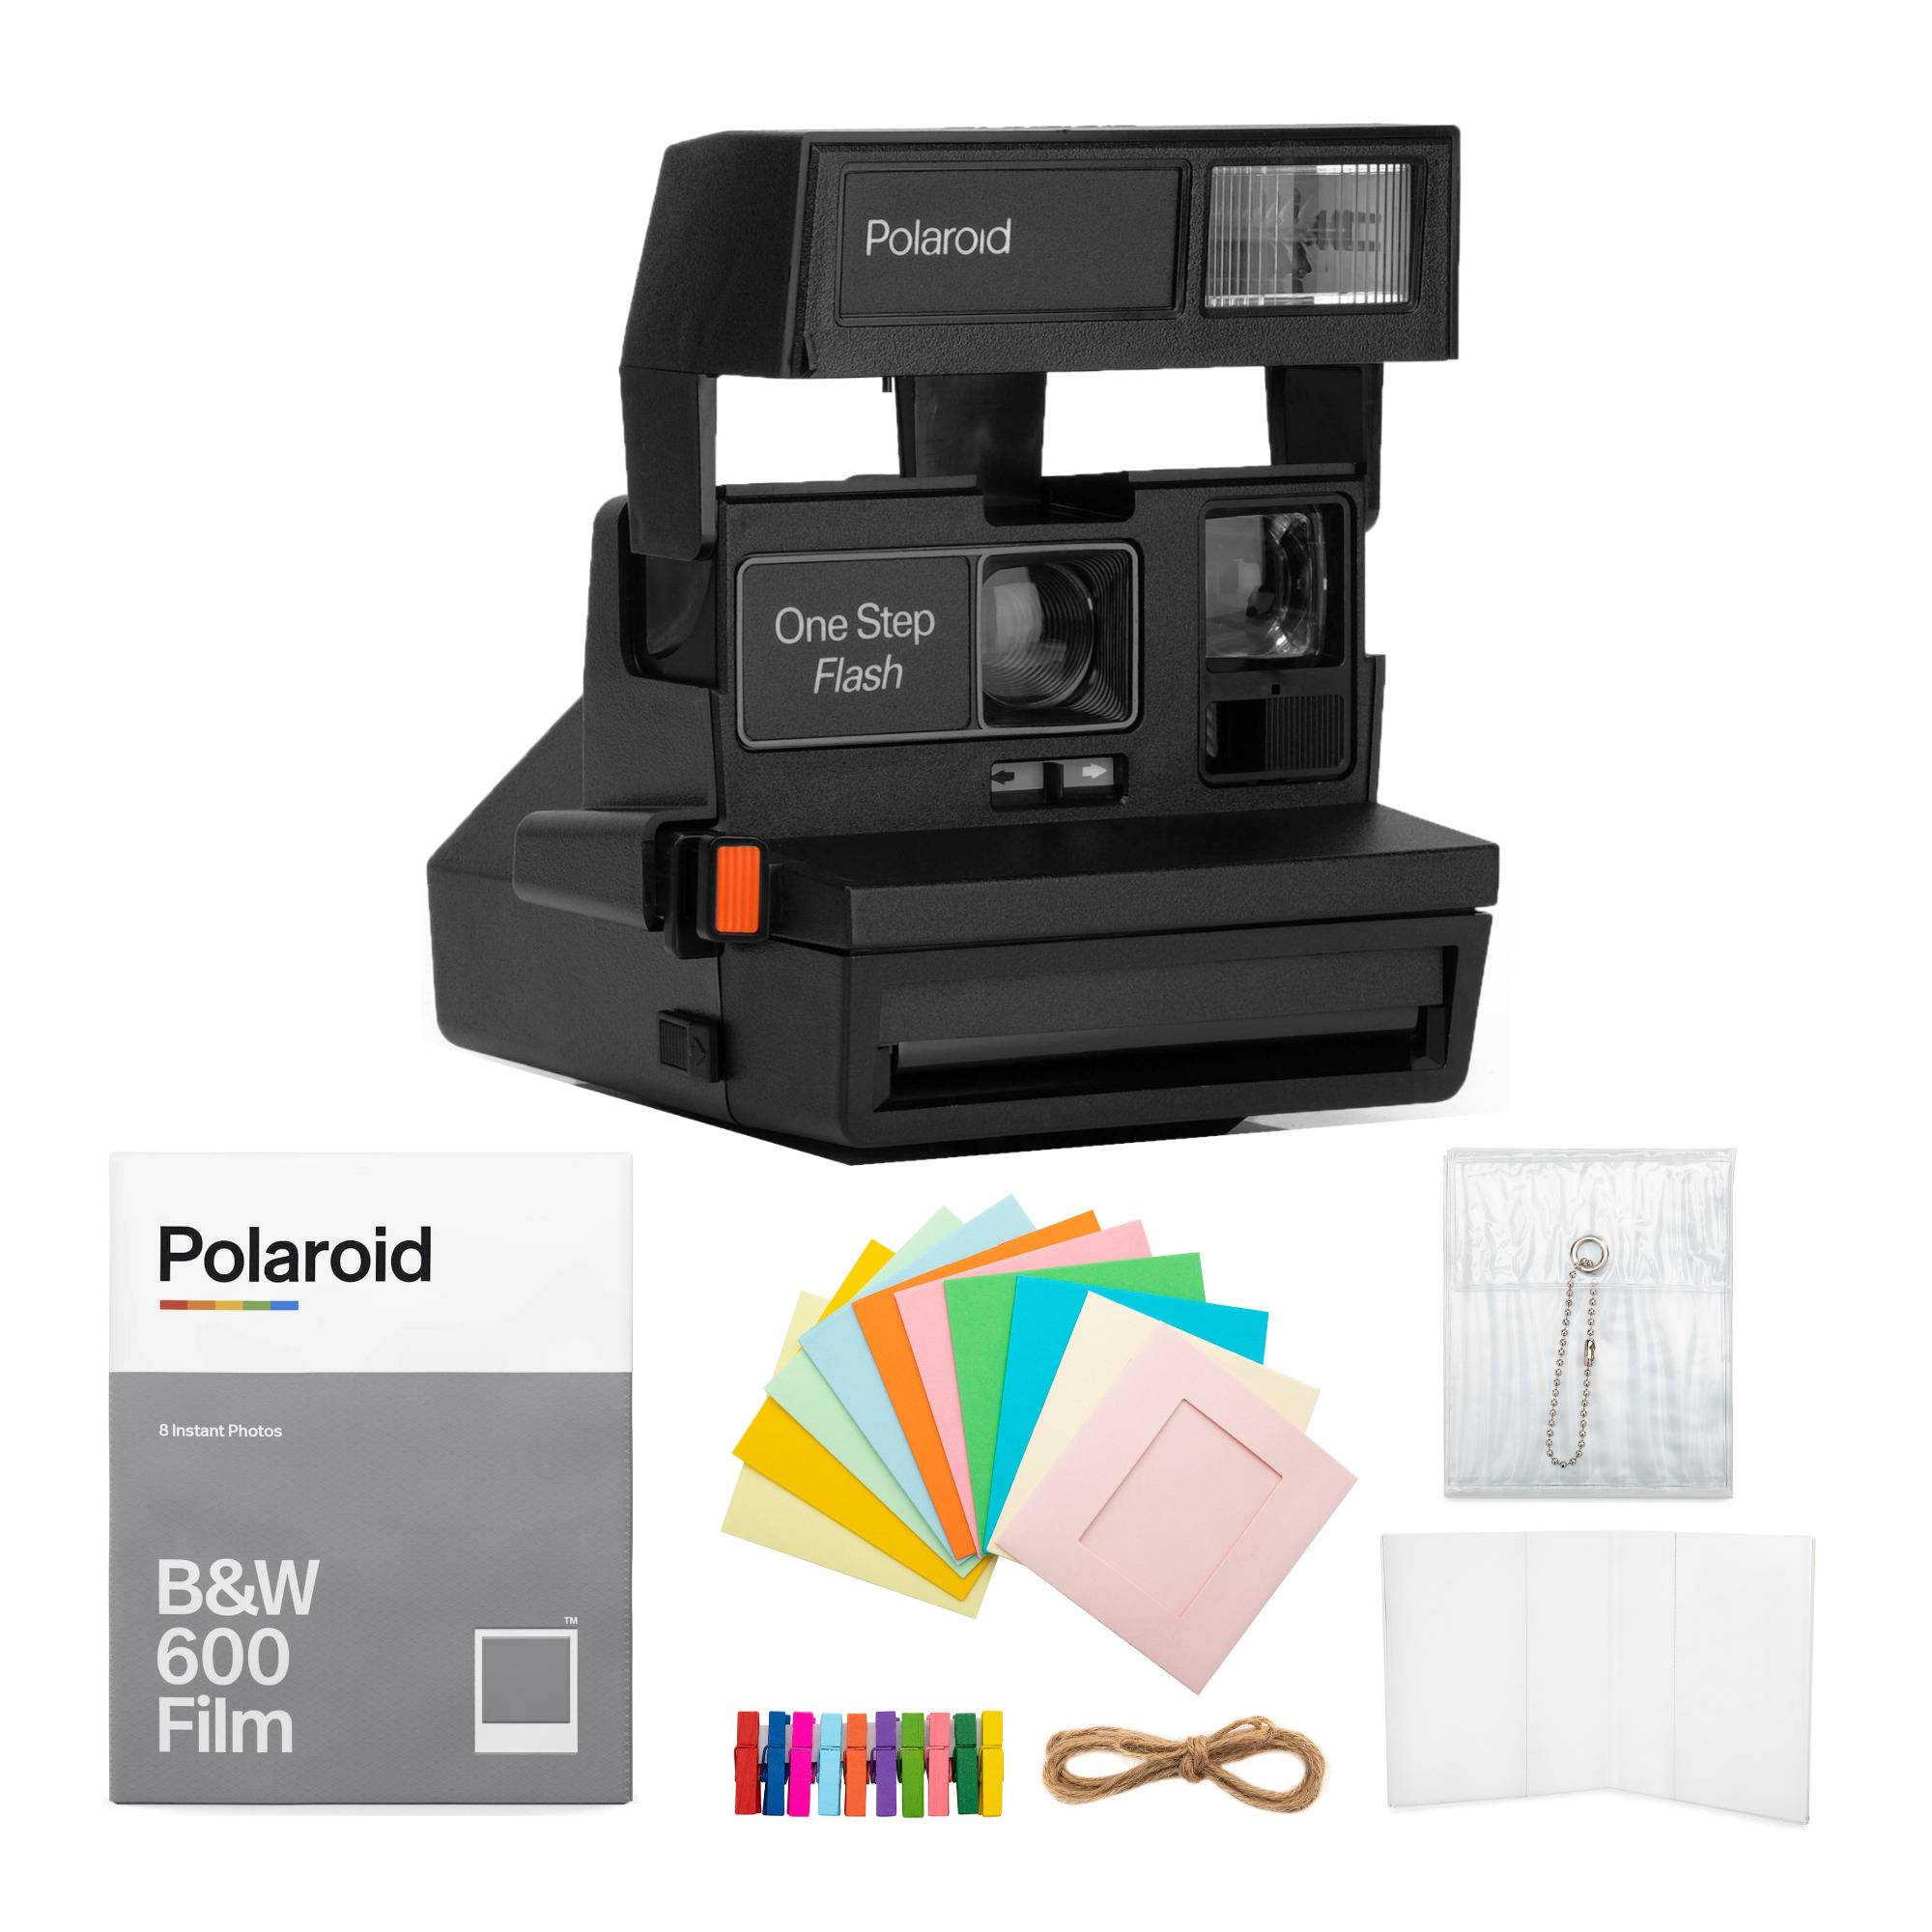 Polaroid 600 One Step Flash Instant Camera with B&W Film and Accessory Bundle